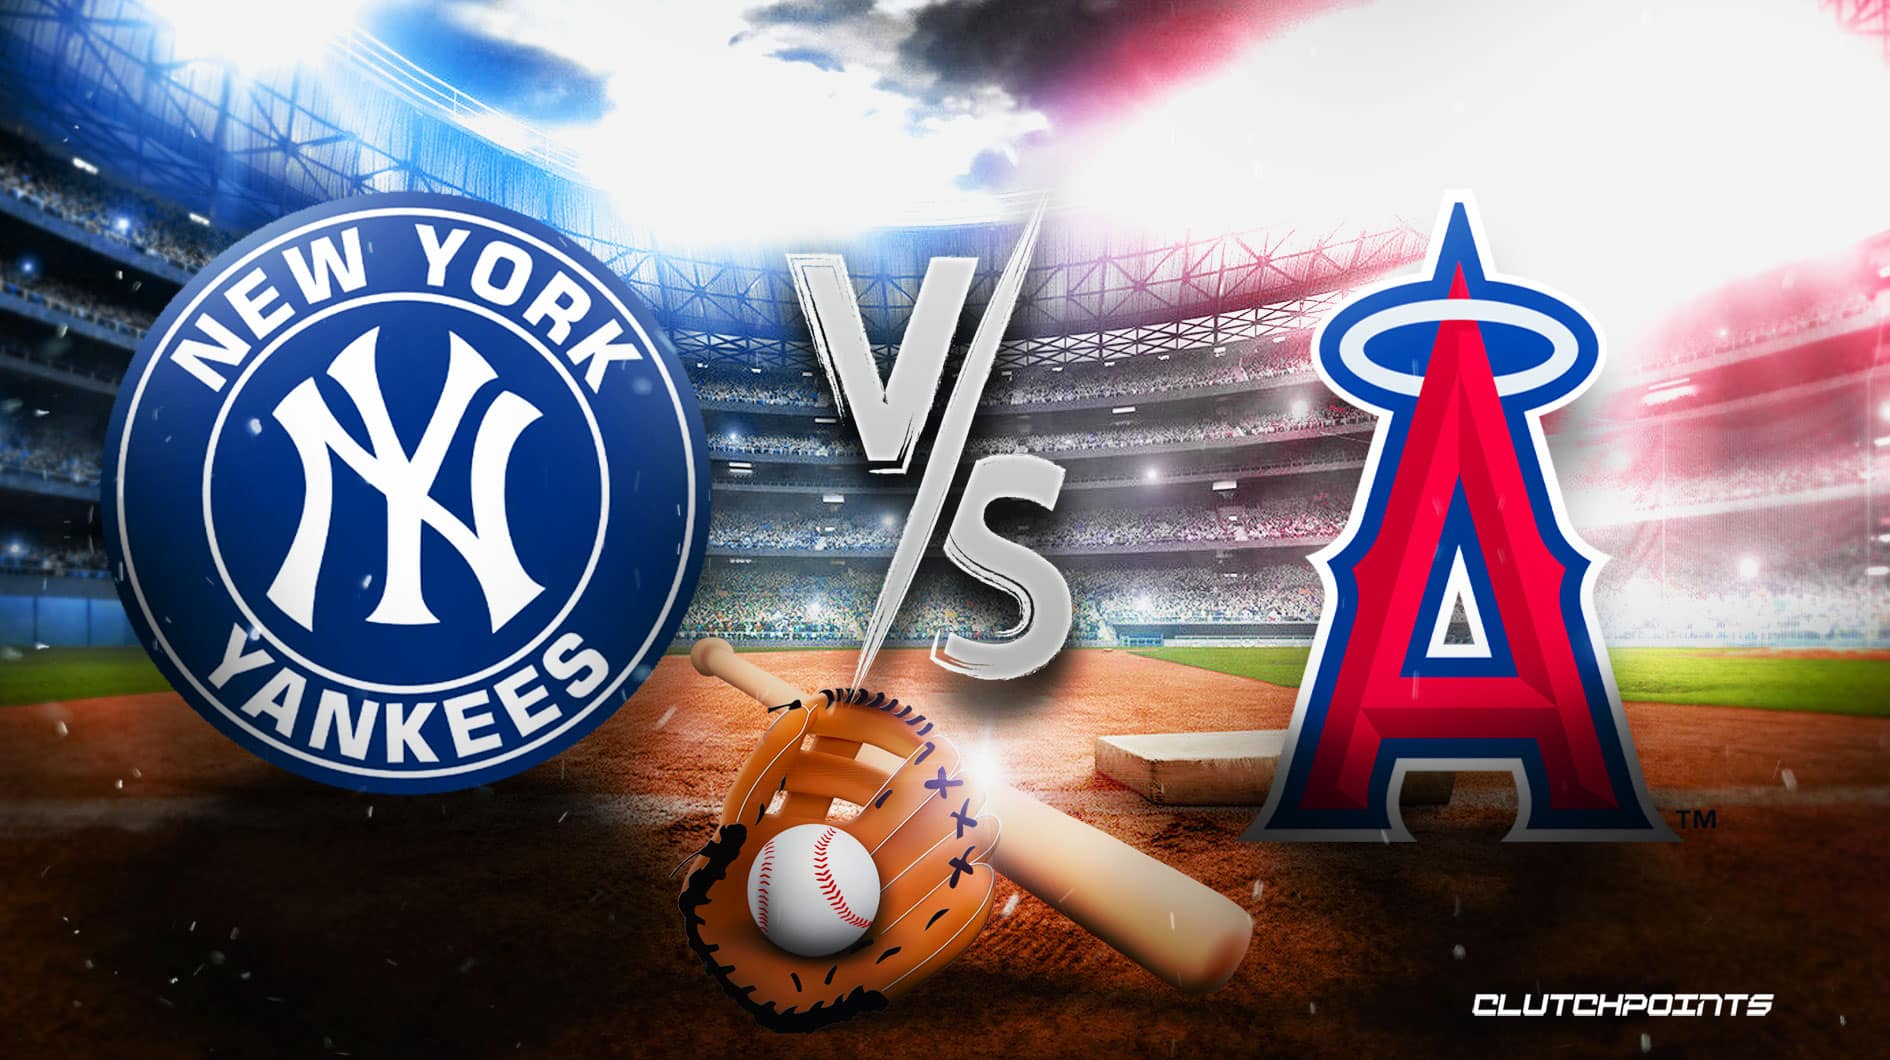 Angels and Dodgers vs. Mets and Yankees - Which MLB town would you